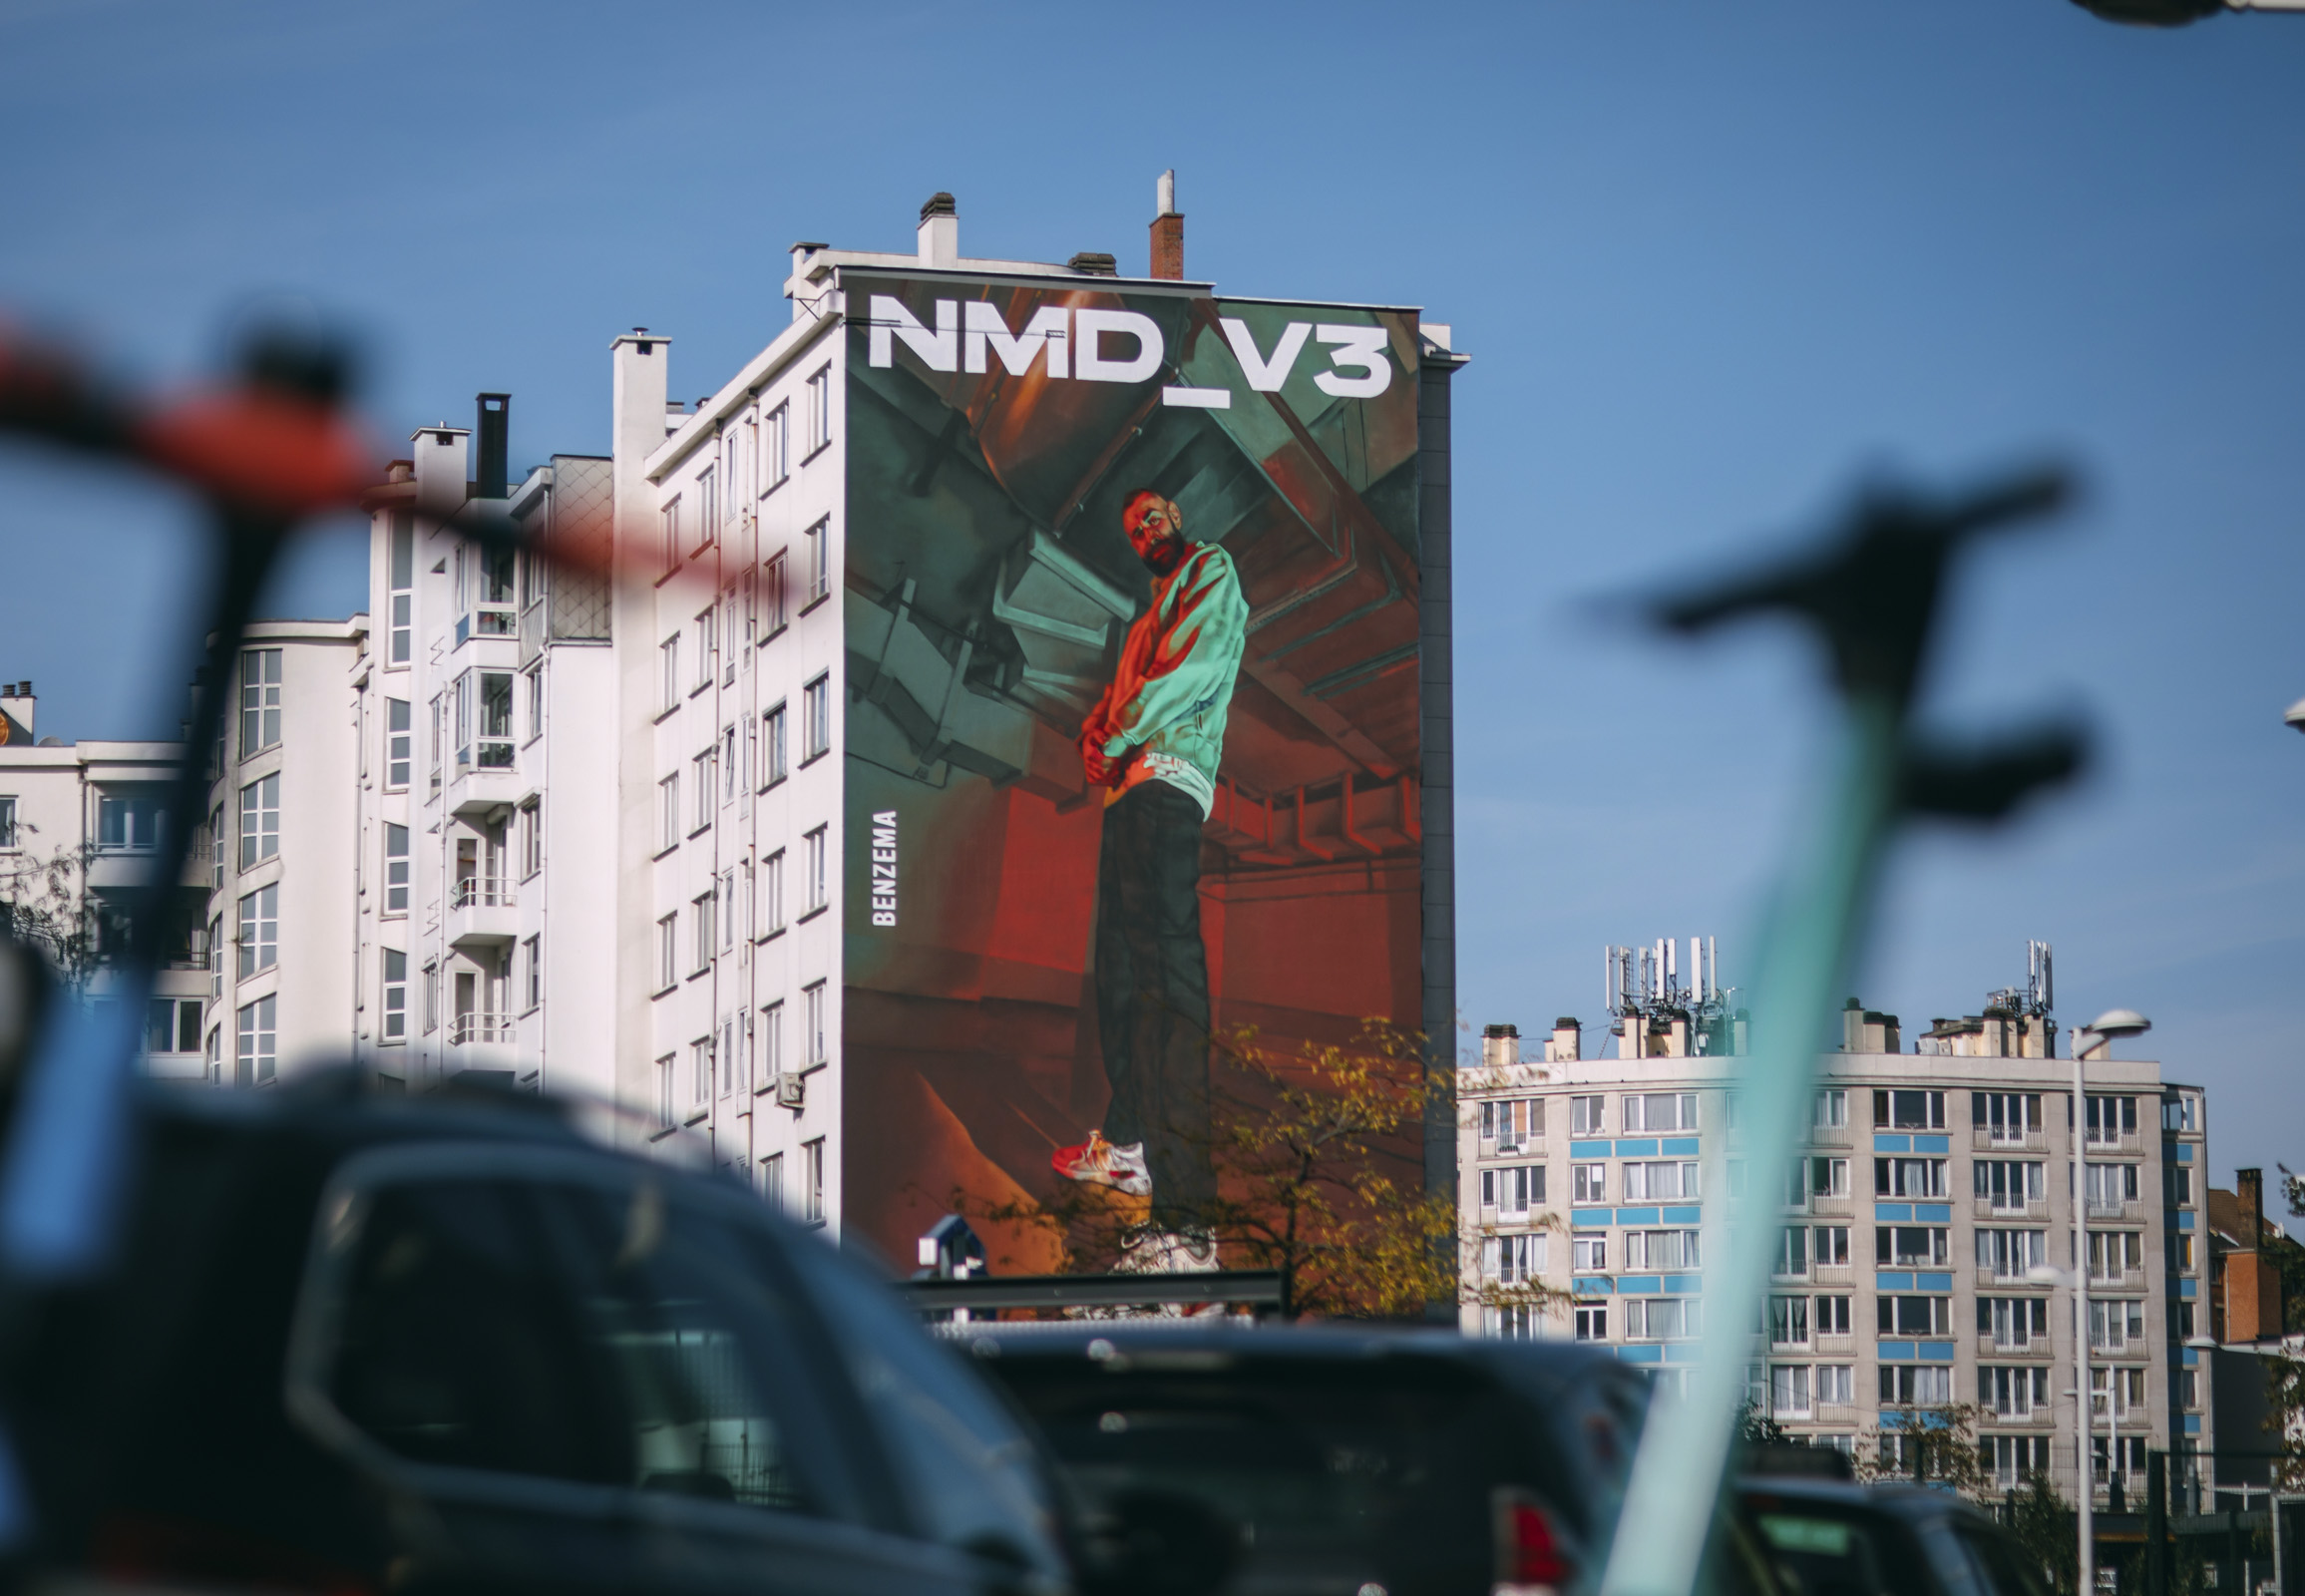 View of the mural for Adidas' NMD_V3 campaign